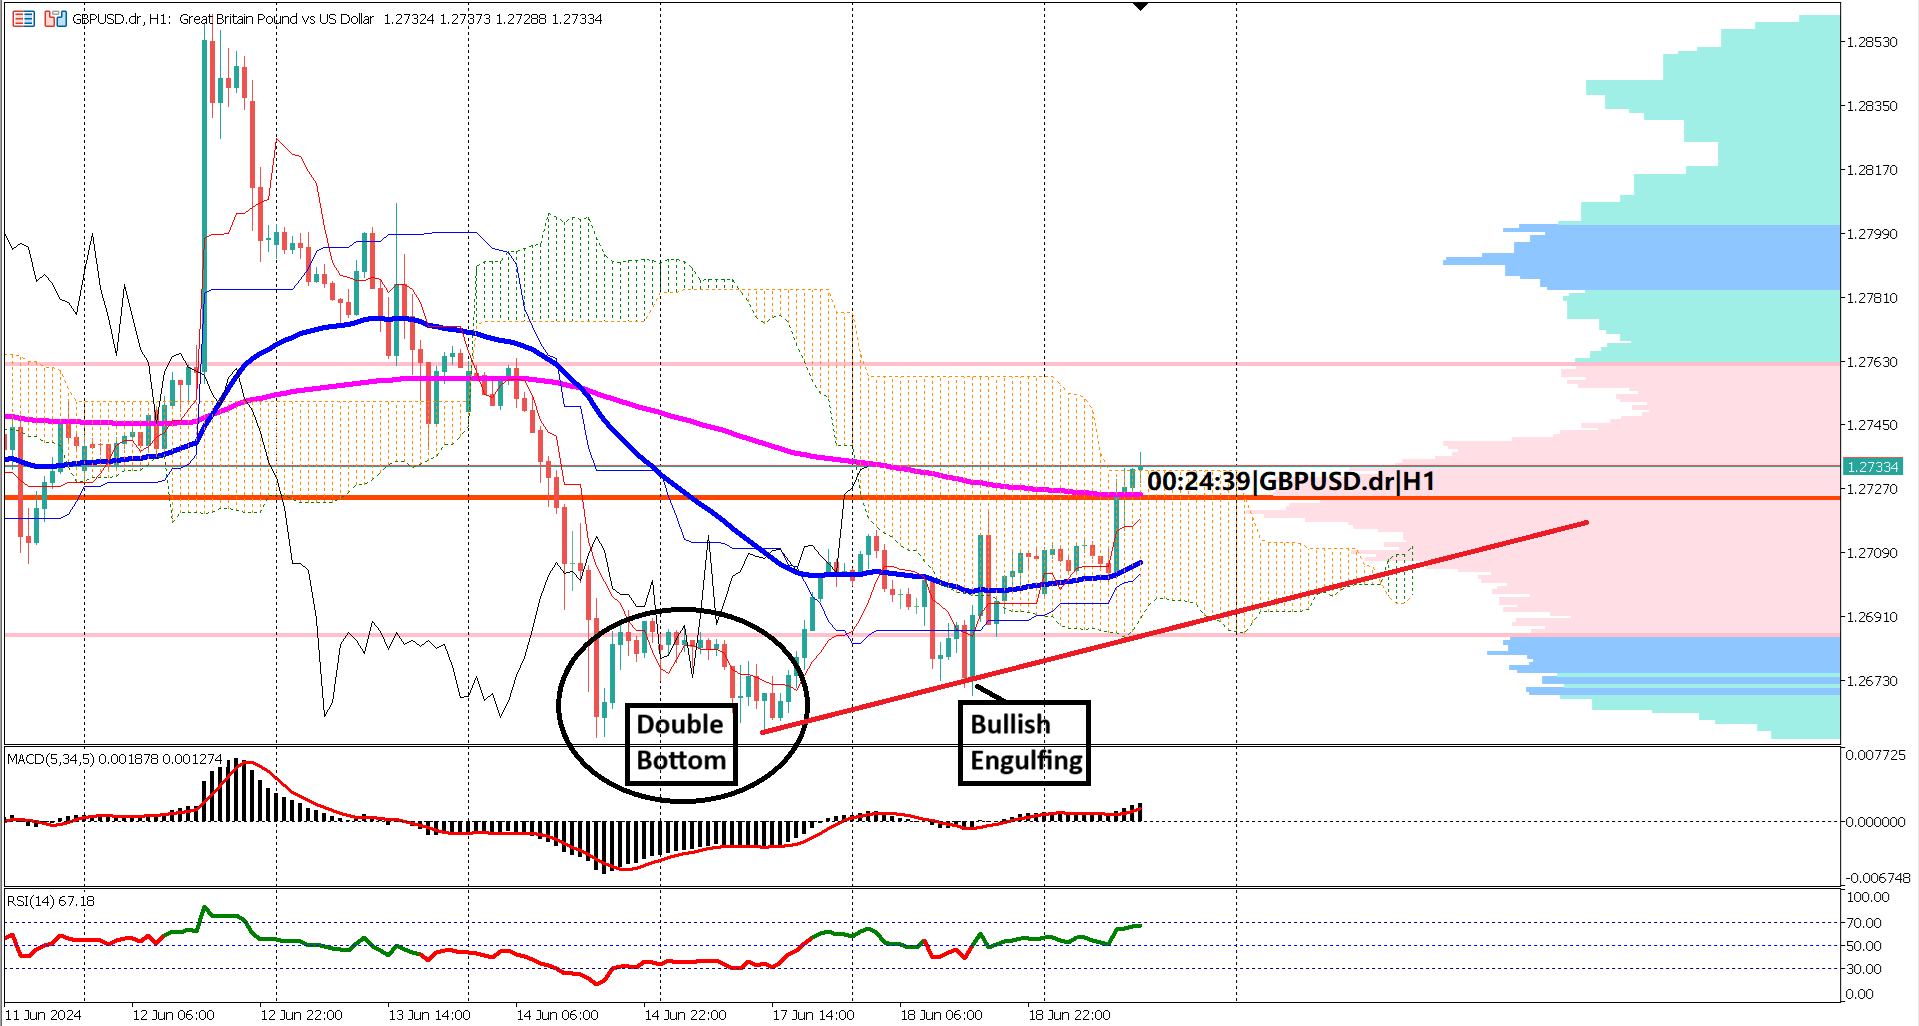 Bullish Patterns Emerge in GBPUSD Amidst Stable Inflation Metrics